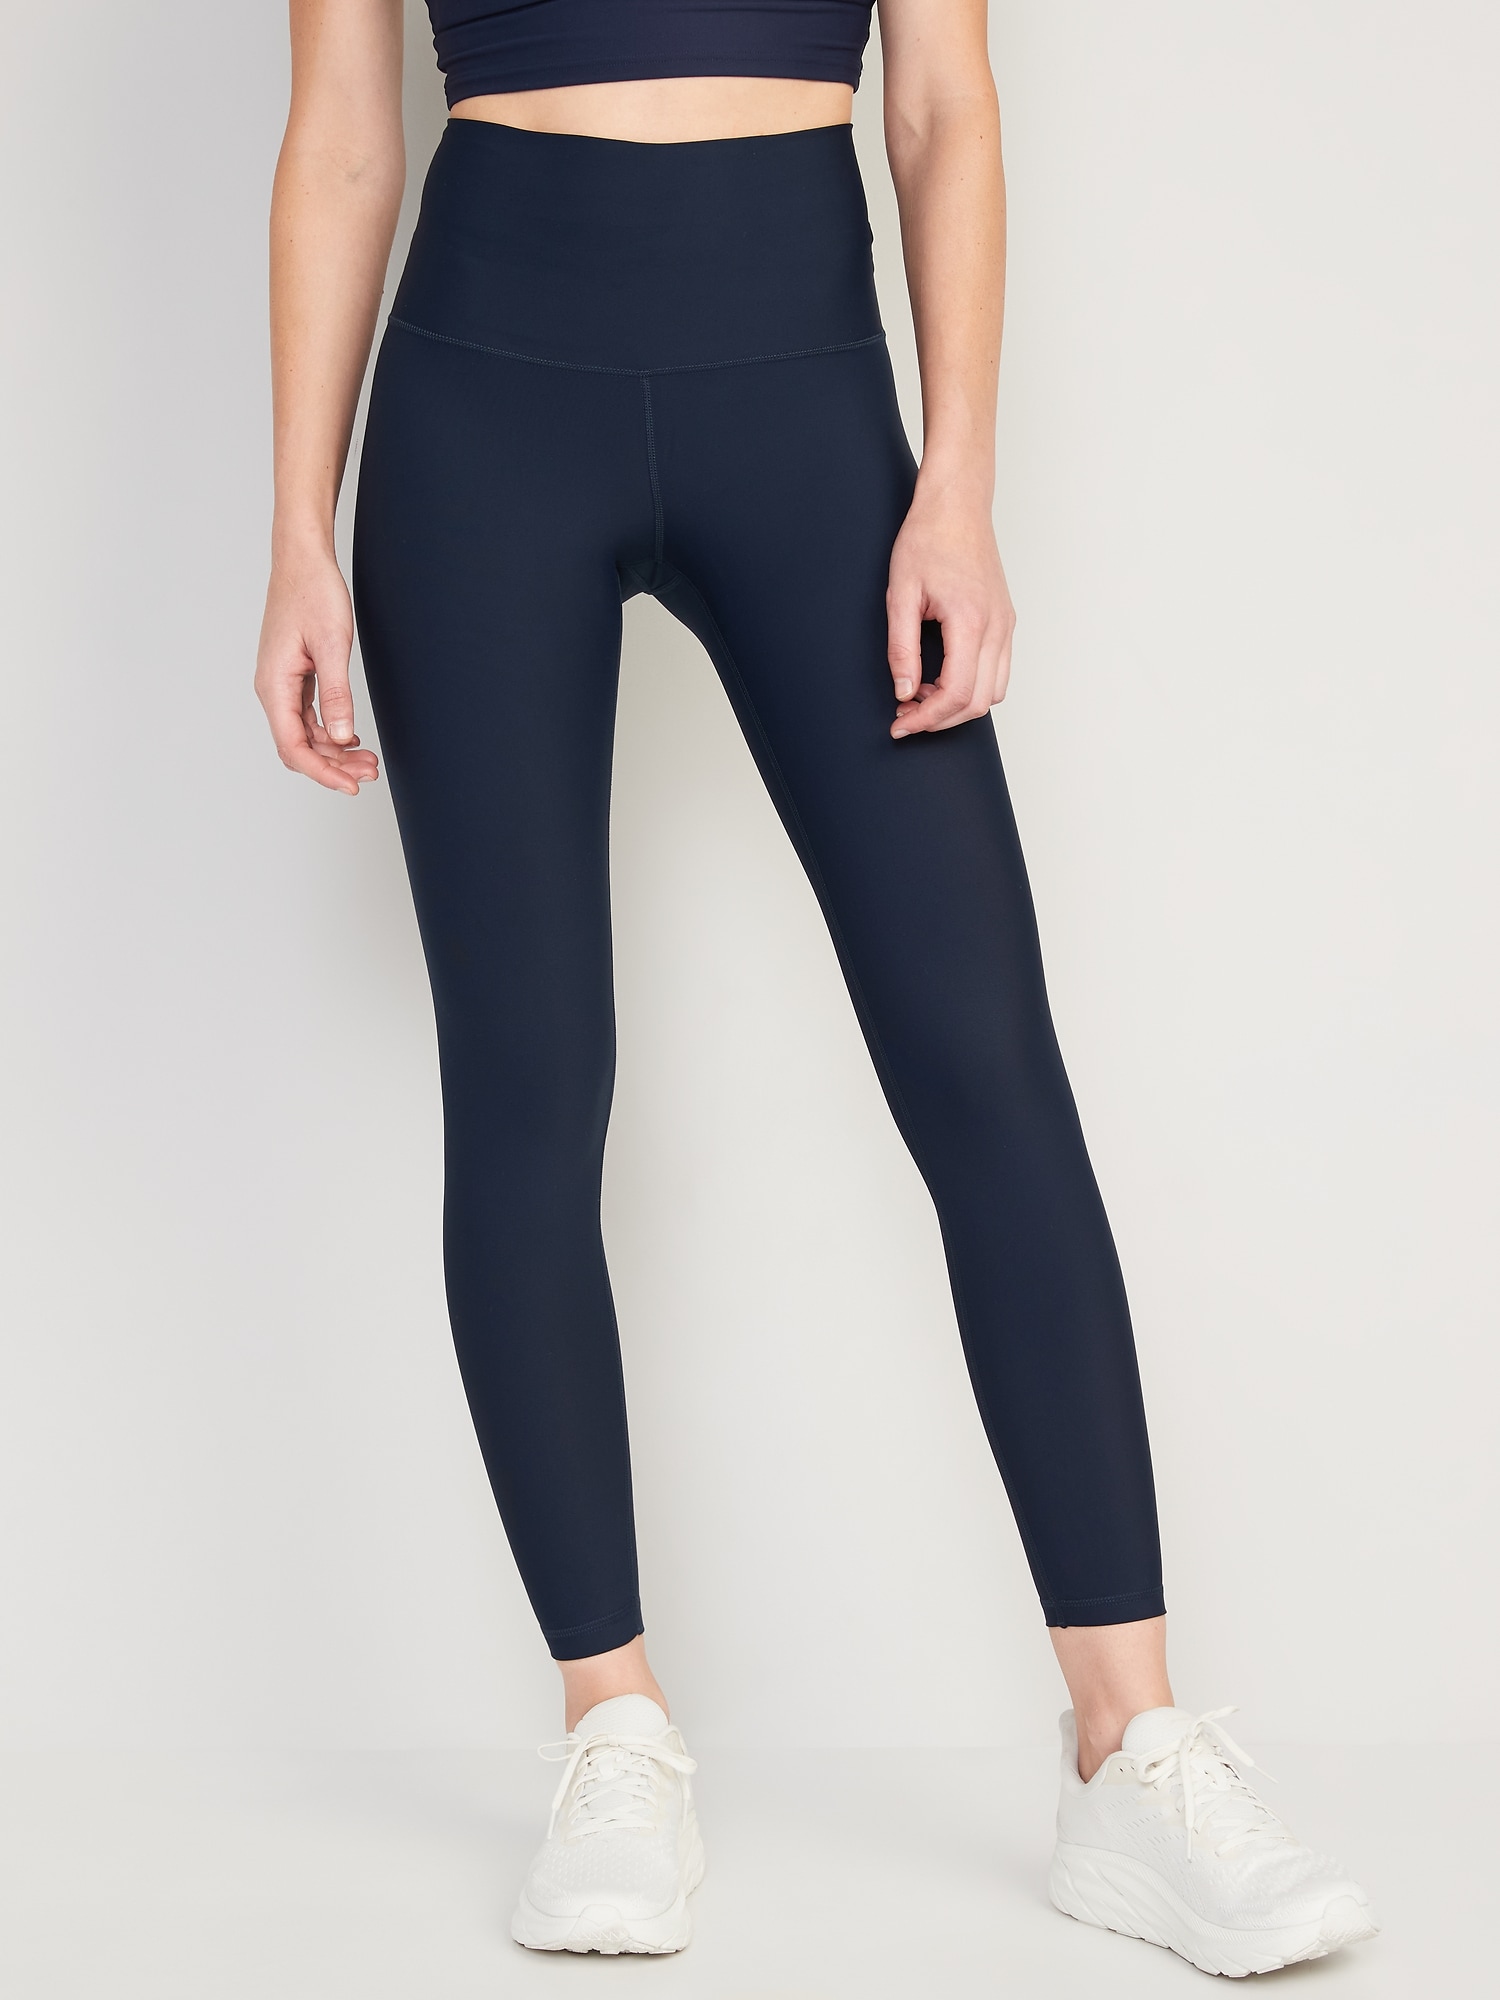 Old Navy - Extra High-Waisted PowerSoft Leggings for Women gray